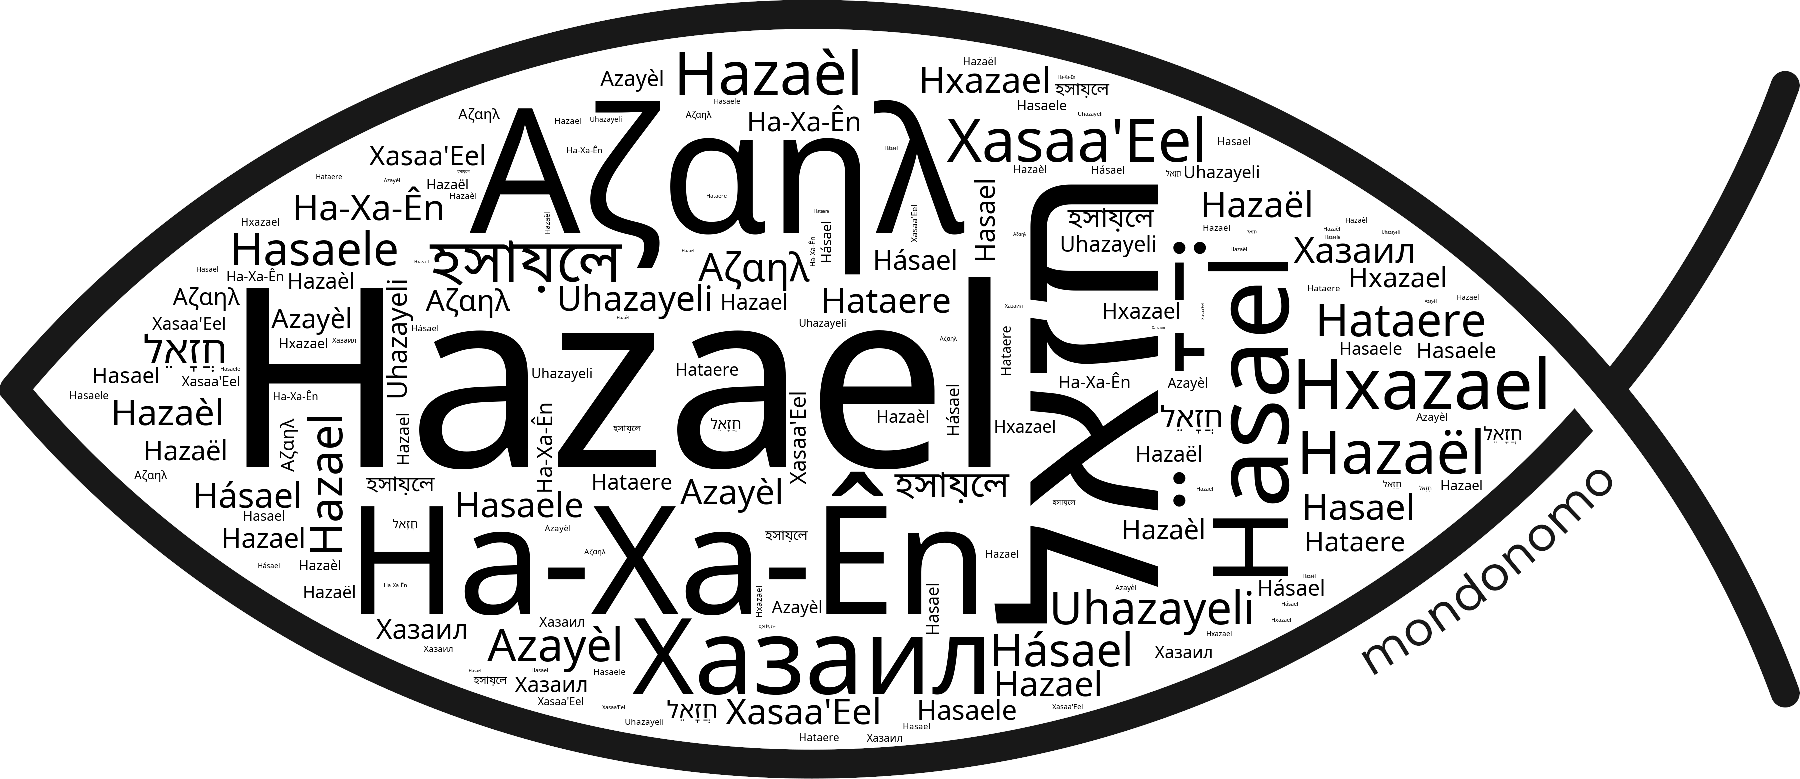 Name Hazael in the world's Bibles